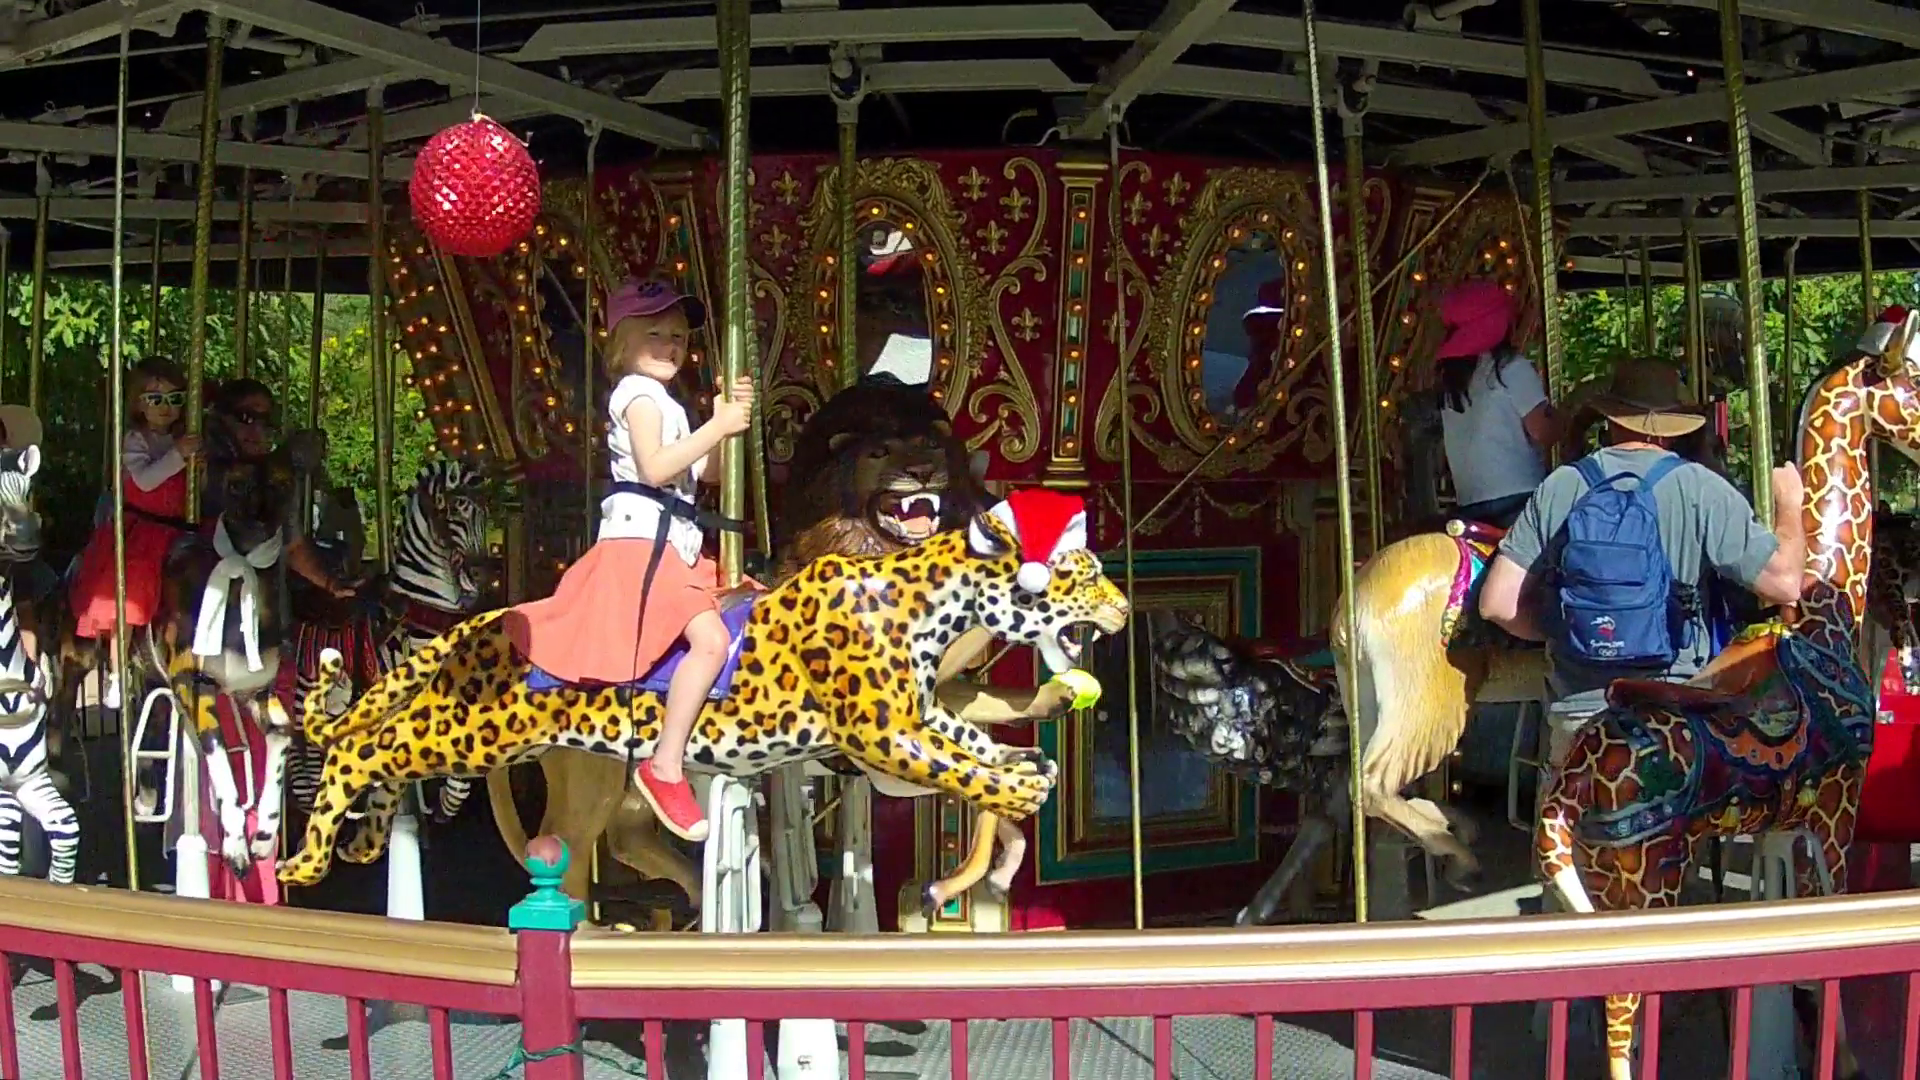 Children Riding Colorful New Carousel Or Merry-Go-Round Stock Video ...